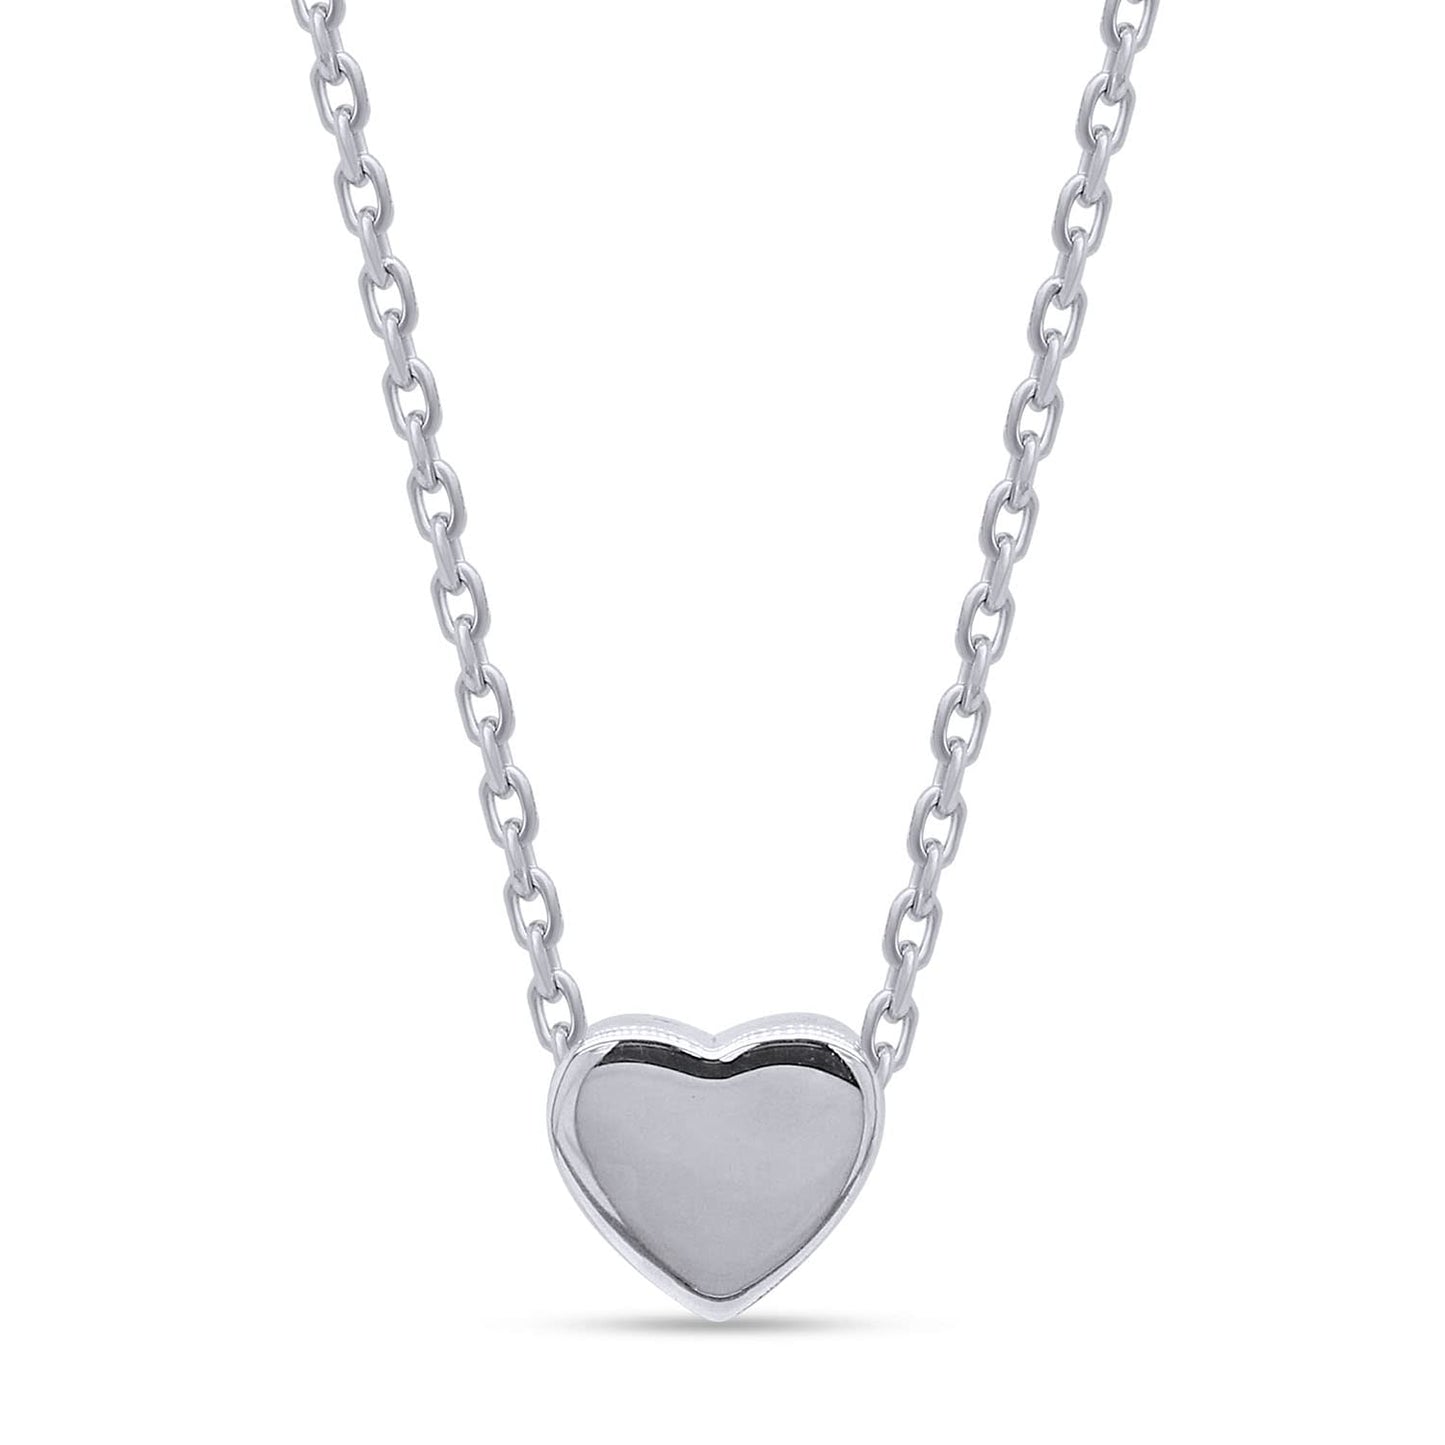 Minimalistic 14k Gold Over Sterling Silver Tiny Floating Heart Pendant Necklace 18" Chain